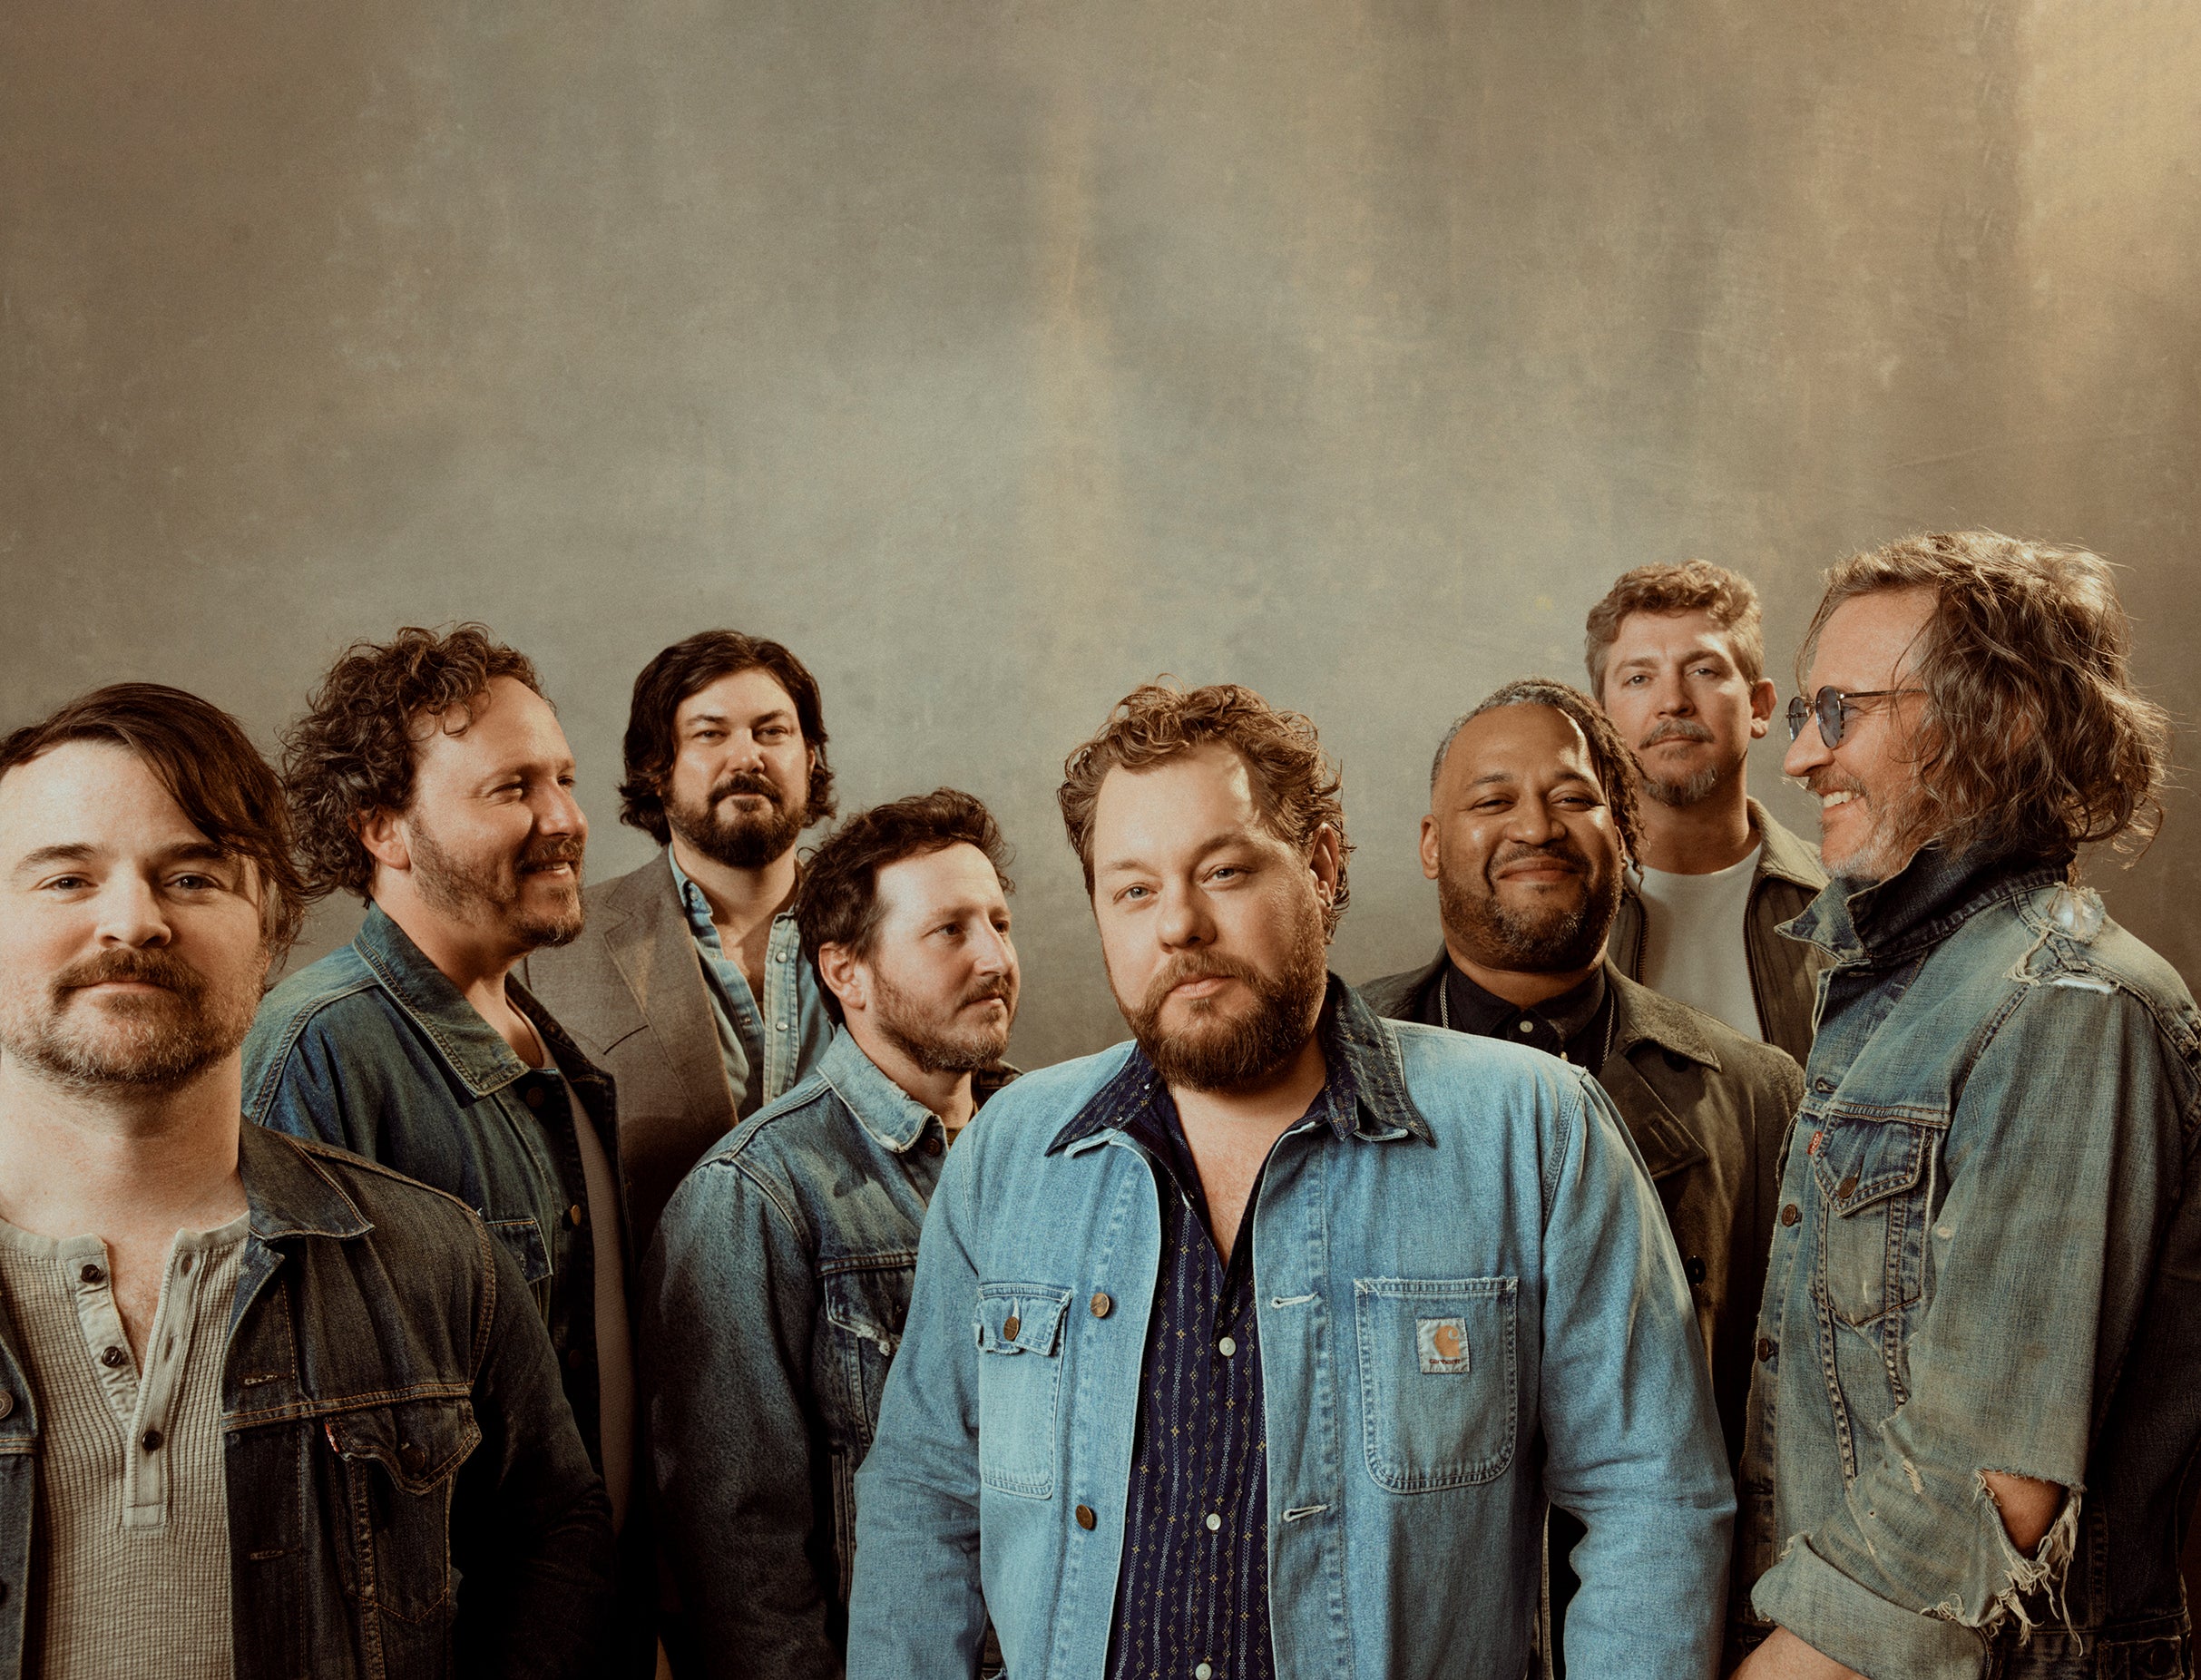 Nathaniel Rateliff & The Night Sweats: South of Here Tour in Bend promo photo for Artist presale offer code